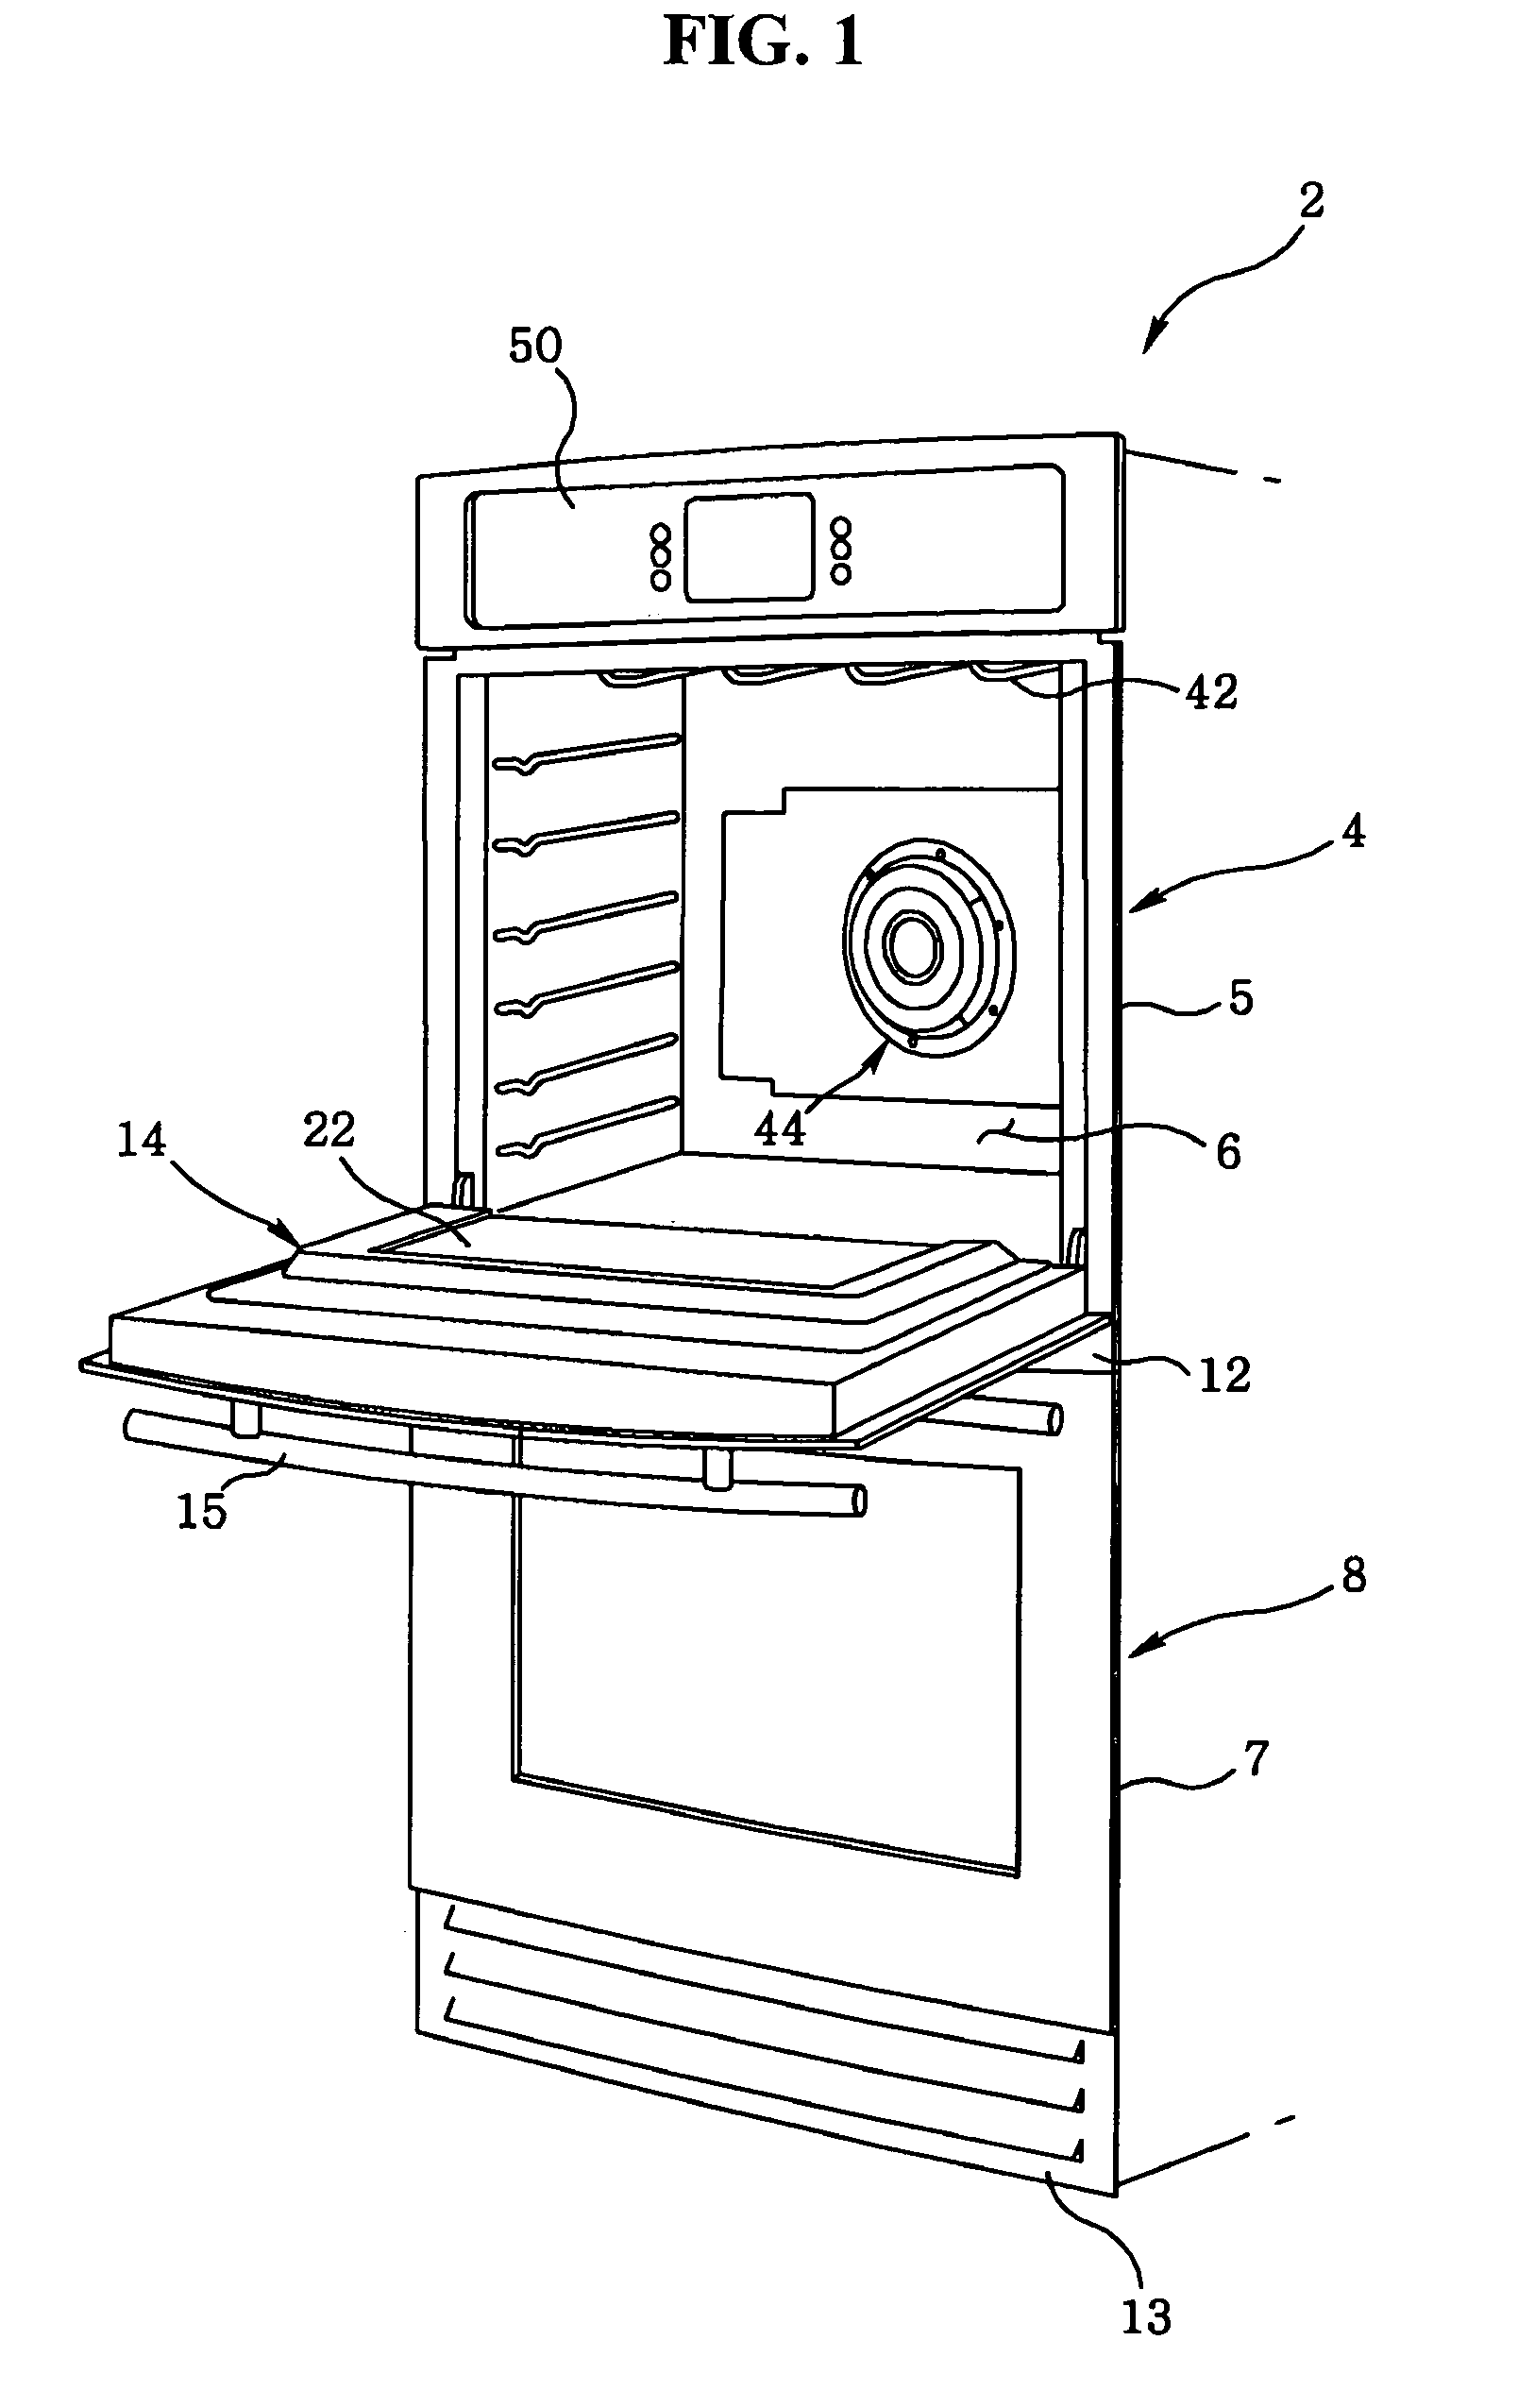 Cooling and exhaust system of dual electric oven